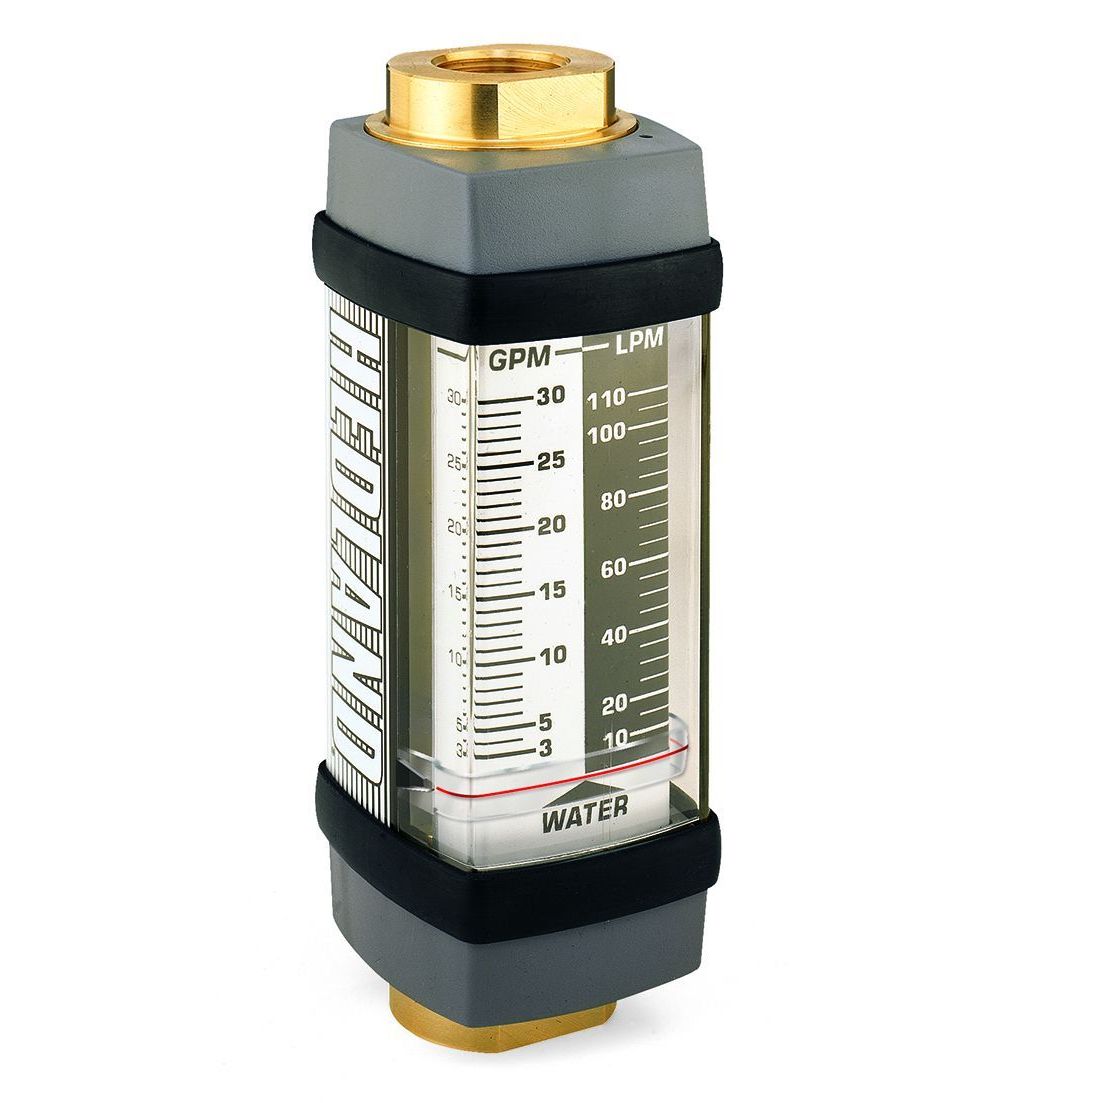 H854B-075 : Hedland 3500psi Brass Flow Meter for Water, #20 SAE (1.25), 10 to 75 GPM